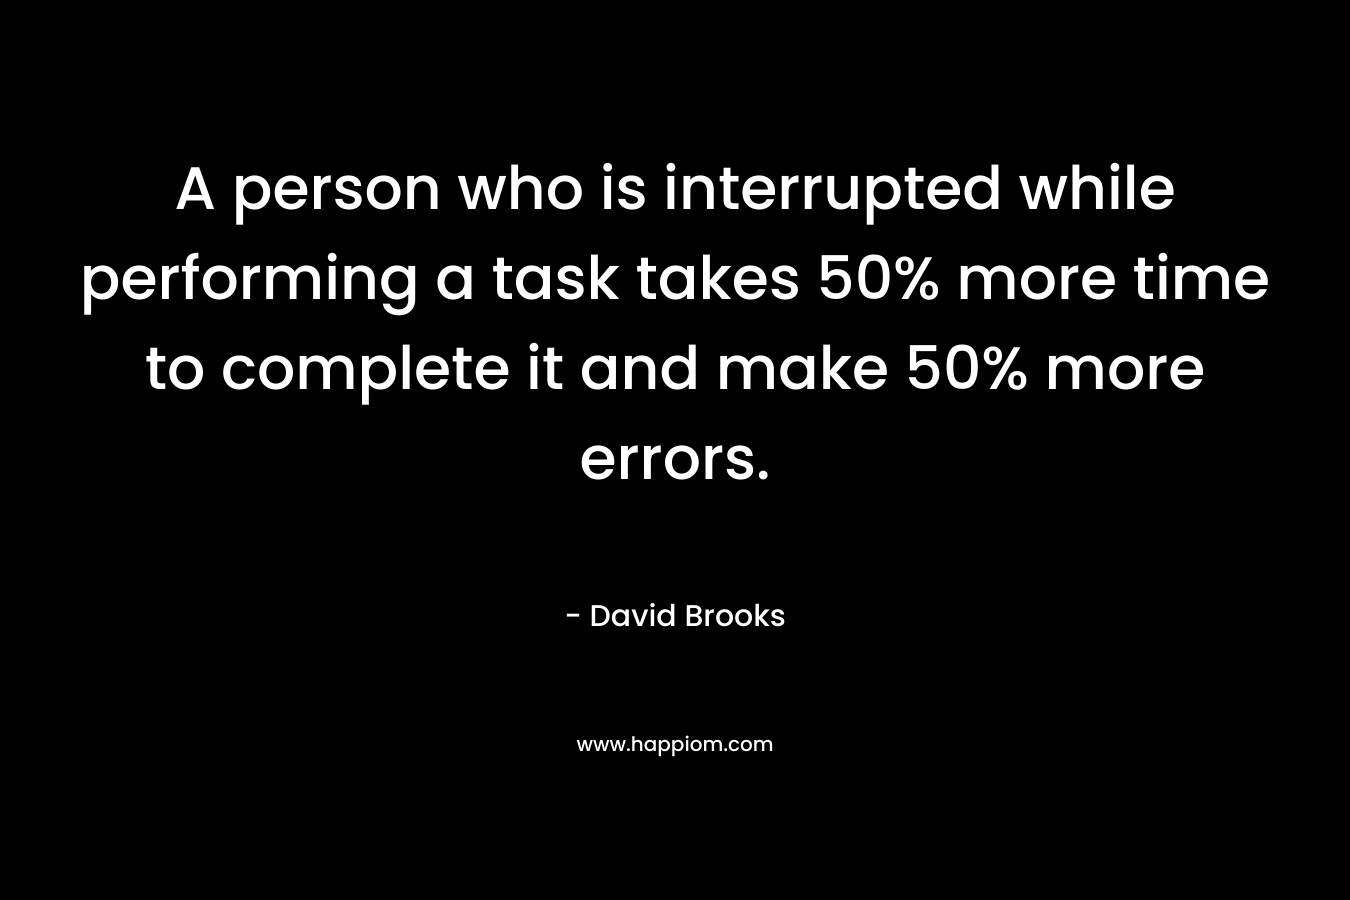 A person who is interrupted while performing a task takes 50% more time to complete it and make 50% more errors. – David Brooks